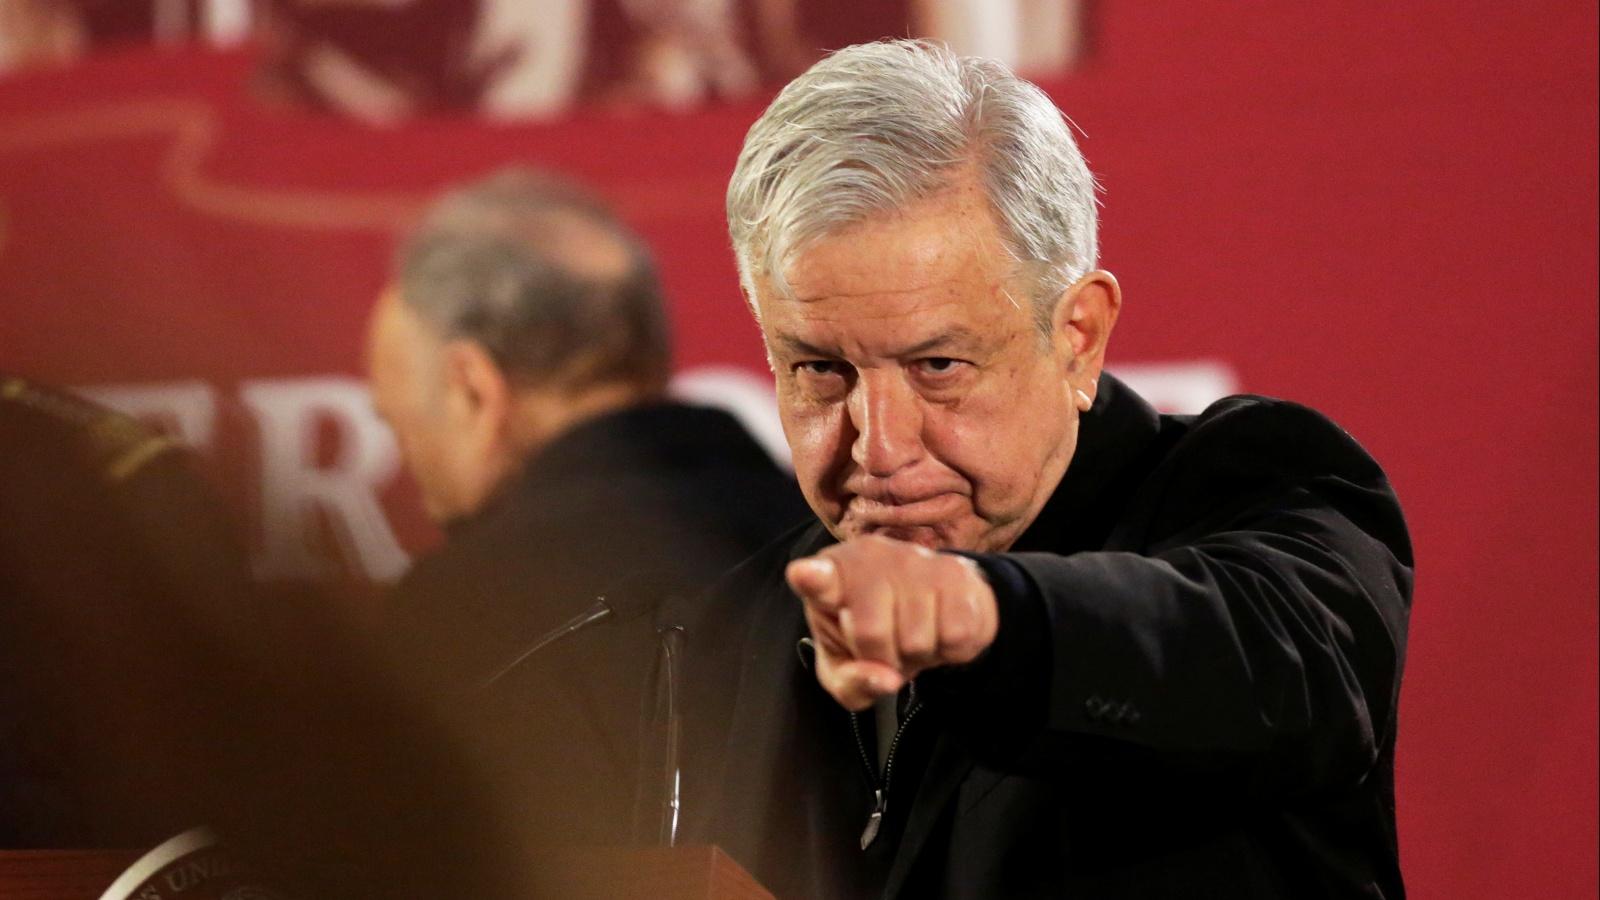 AMLO's 100 days of democratic undermining. Council on Foreign Relations